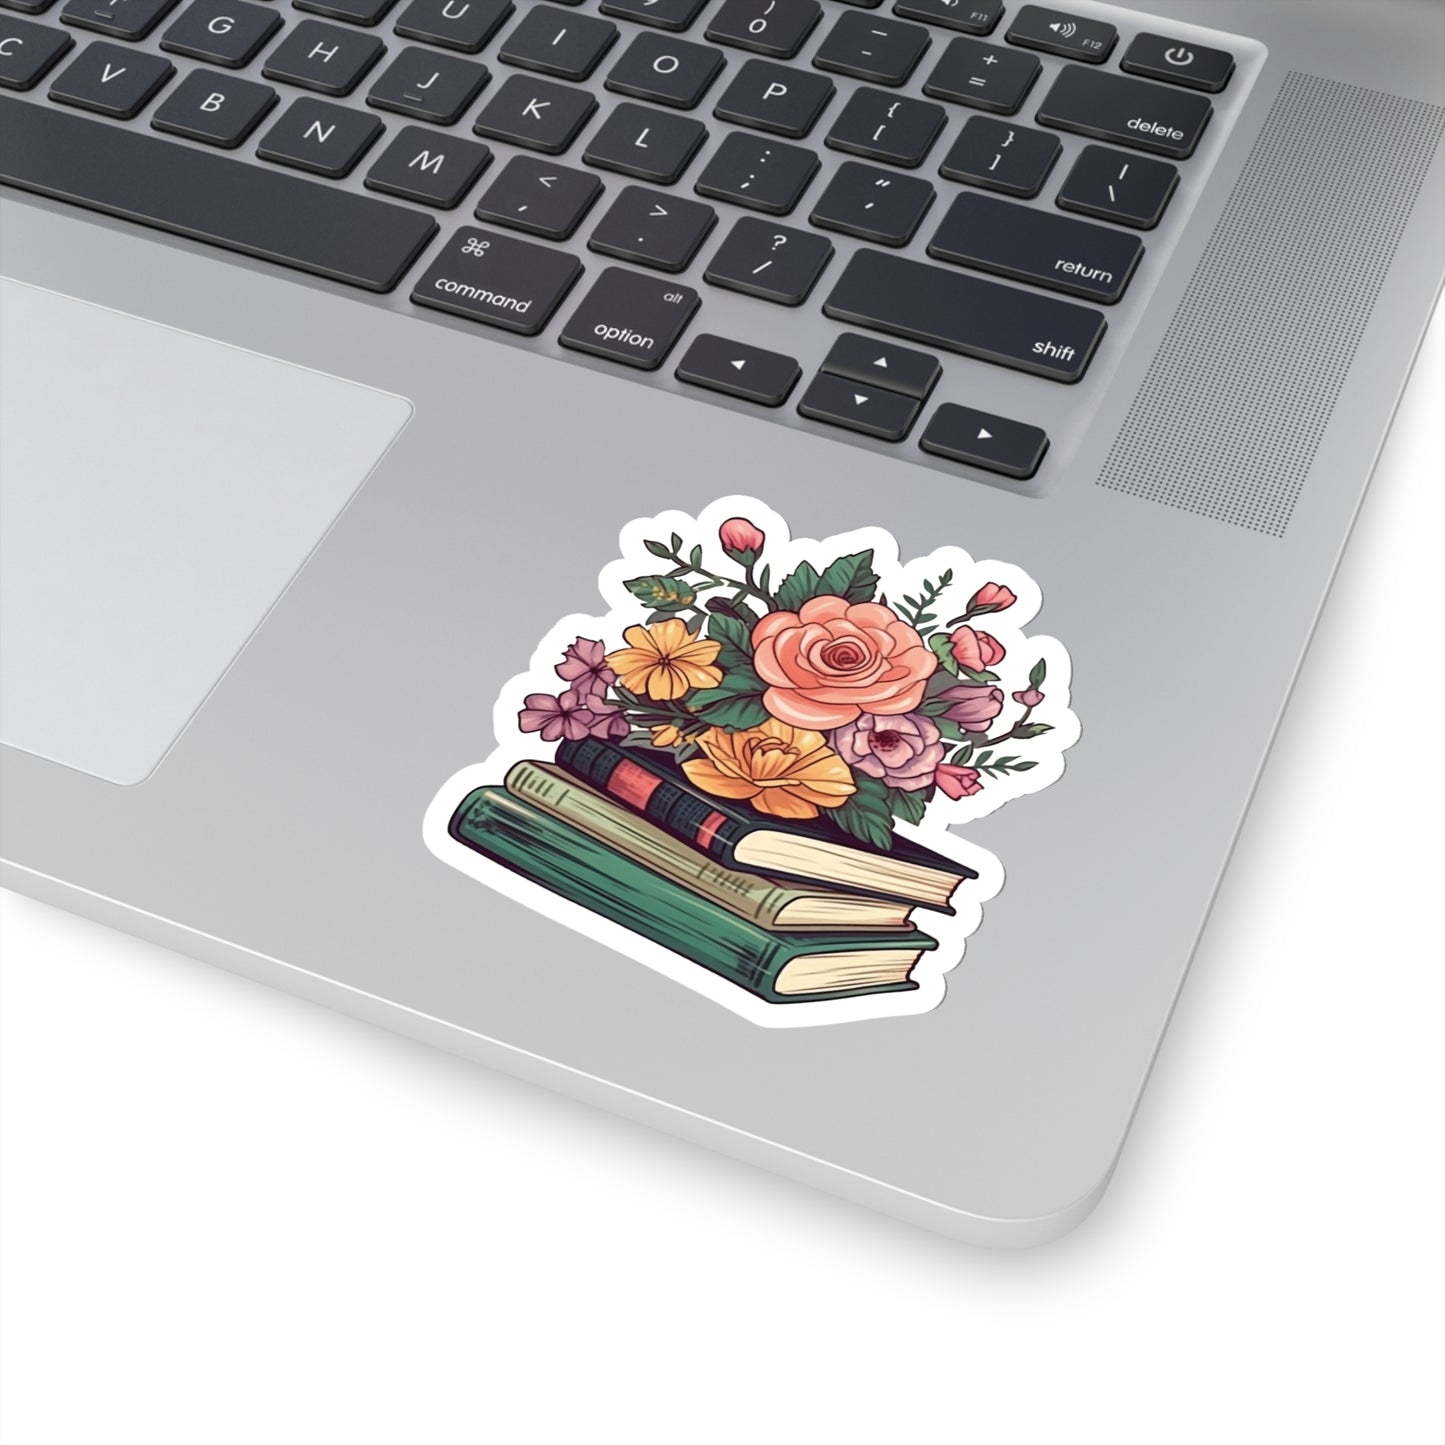 Floral Books Sticker Bright Colors | Fun Stickers | Happy Stickers | Must Have Stickers | Laptop Stickers | Best Stickers | Gift Ideas